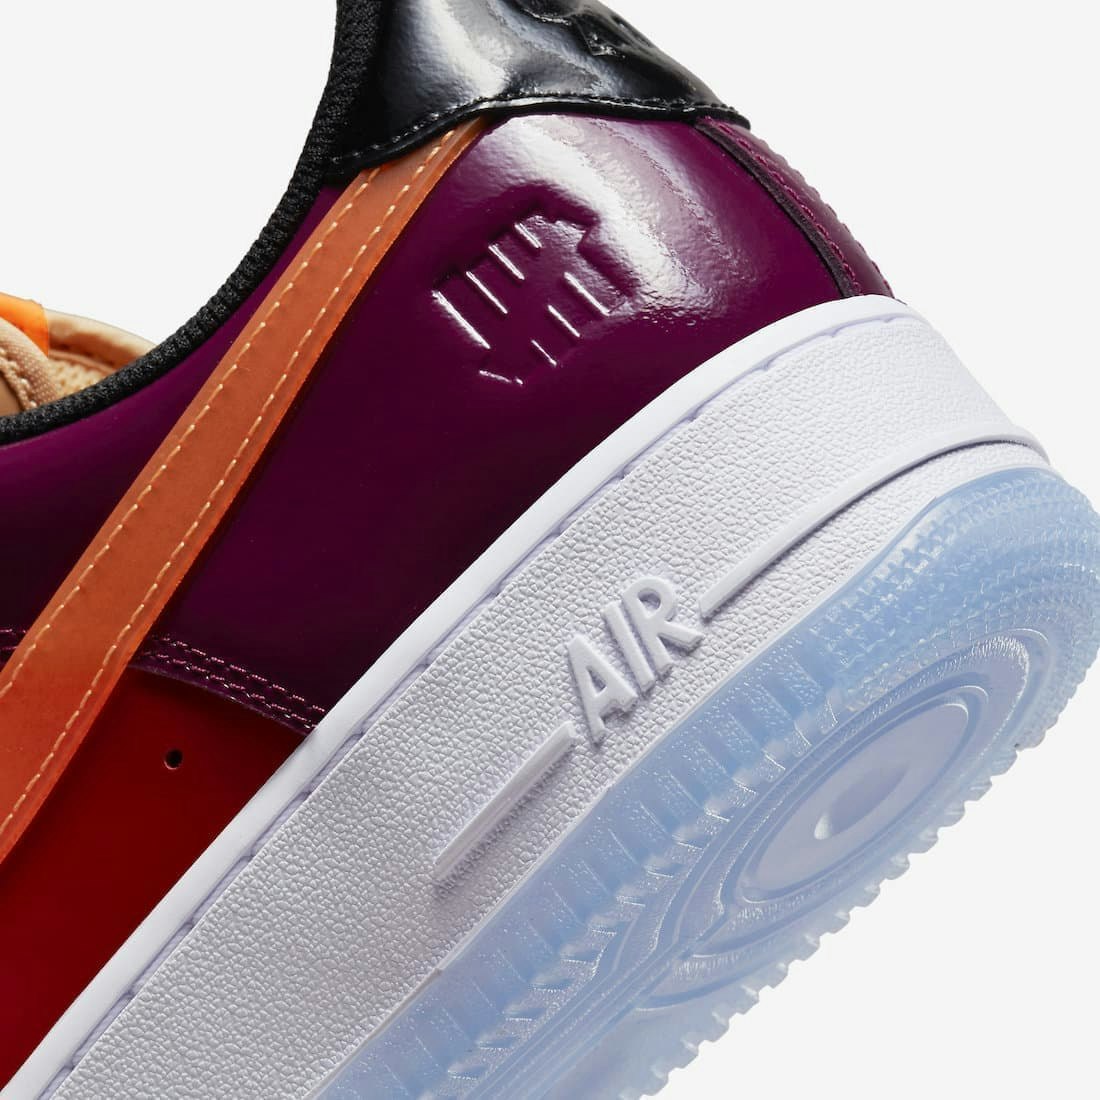 Undefeated x Nike Air Force 1 Low "Multicolor"